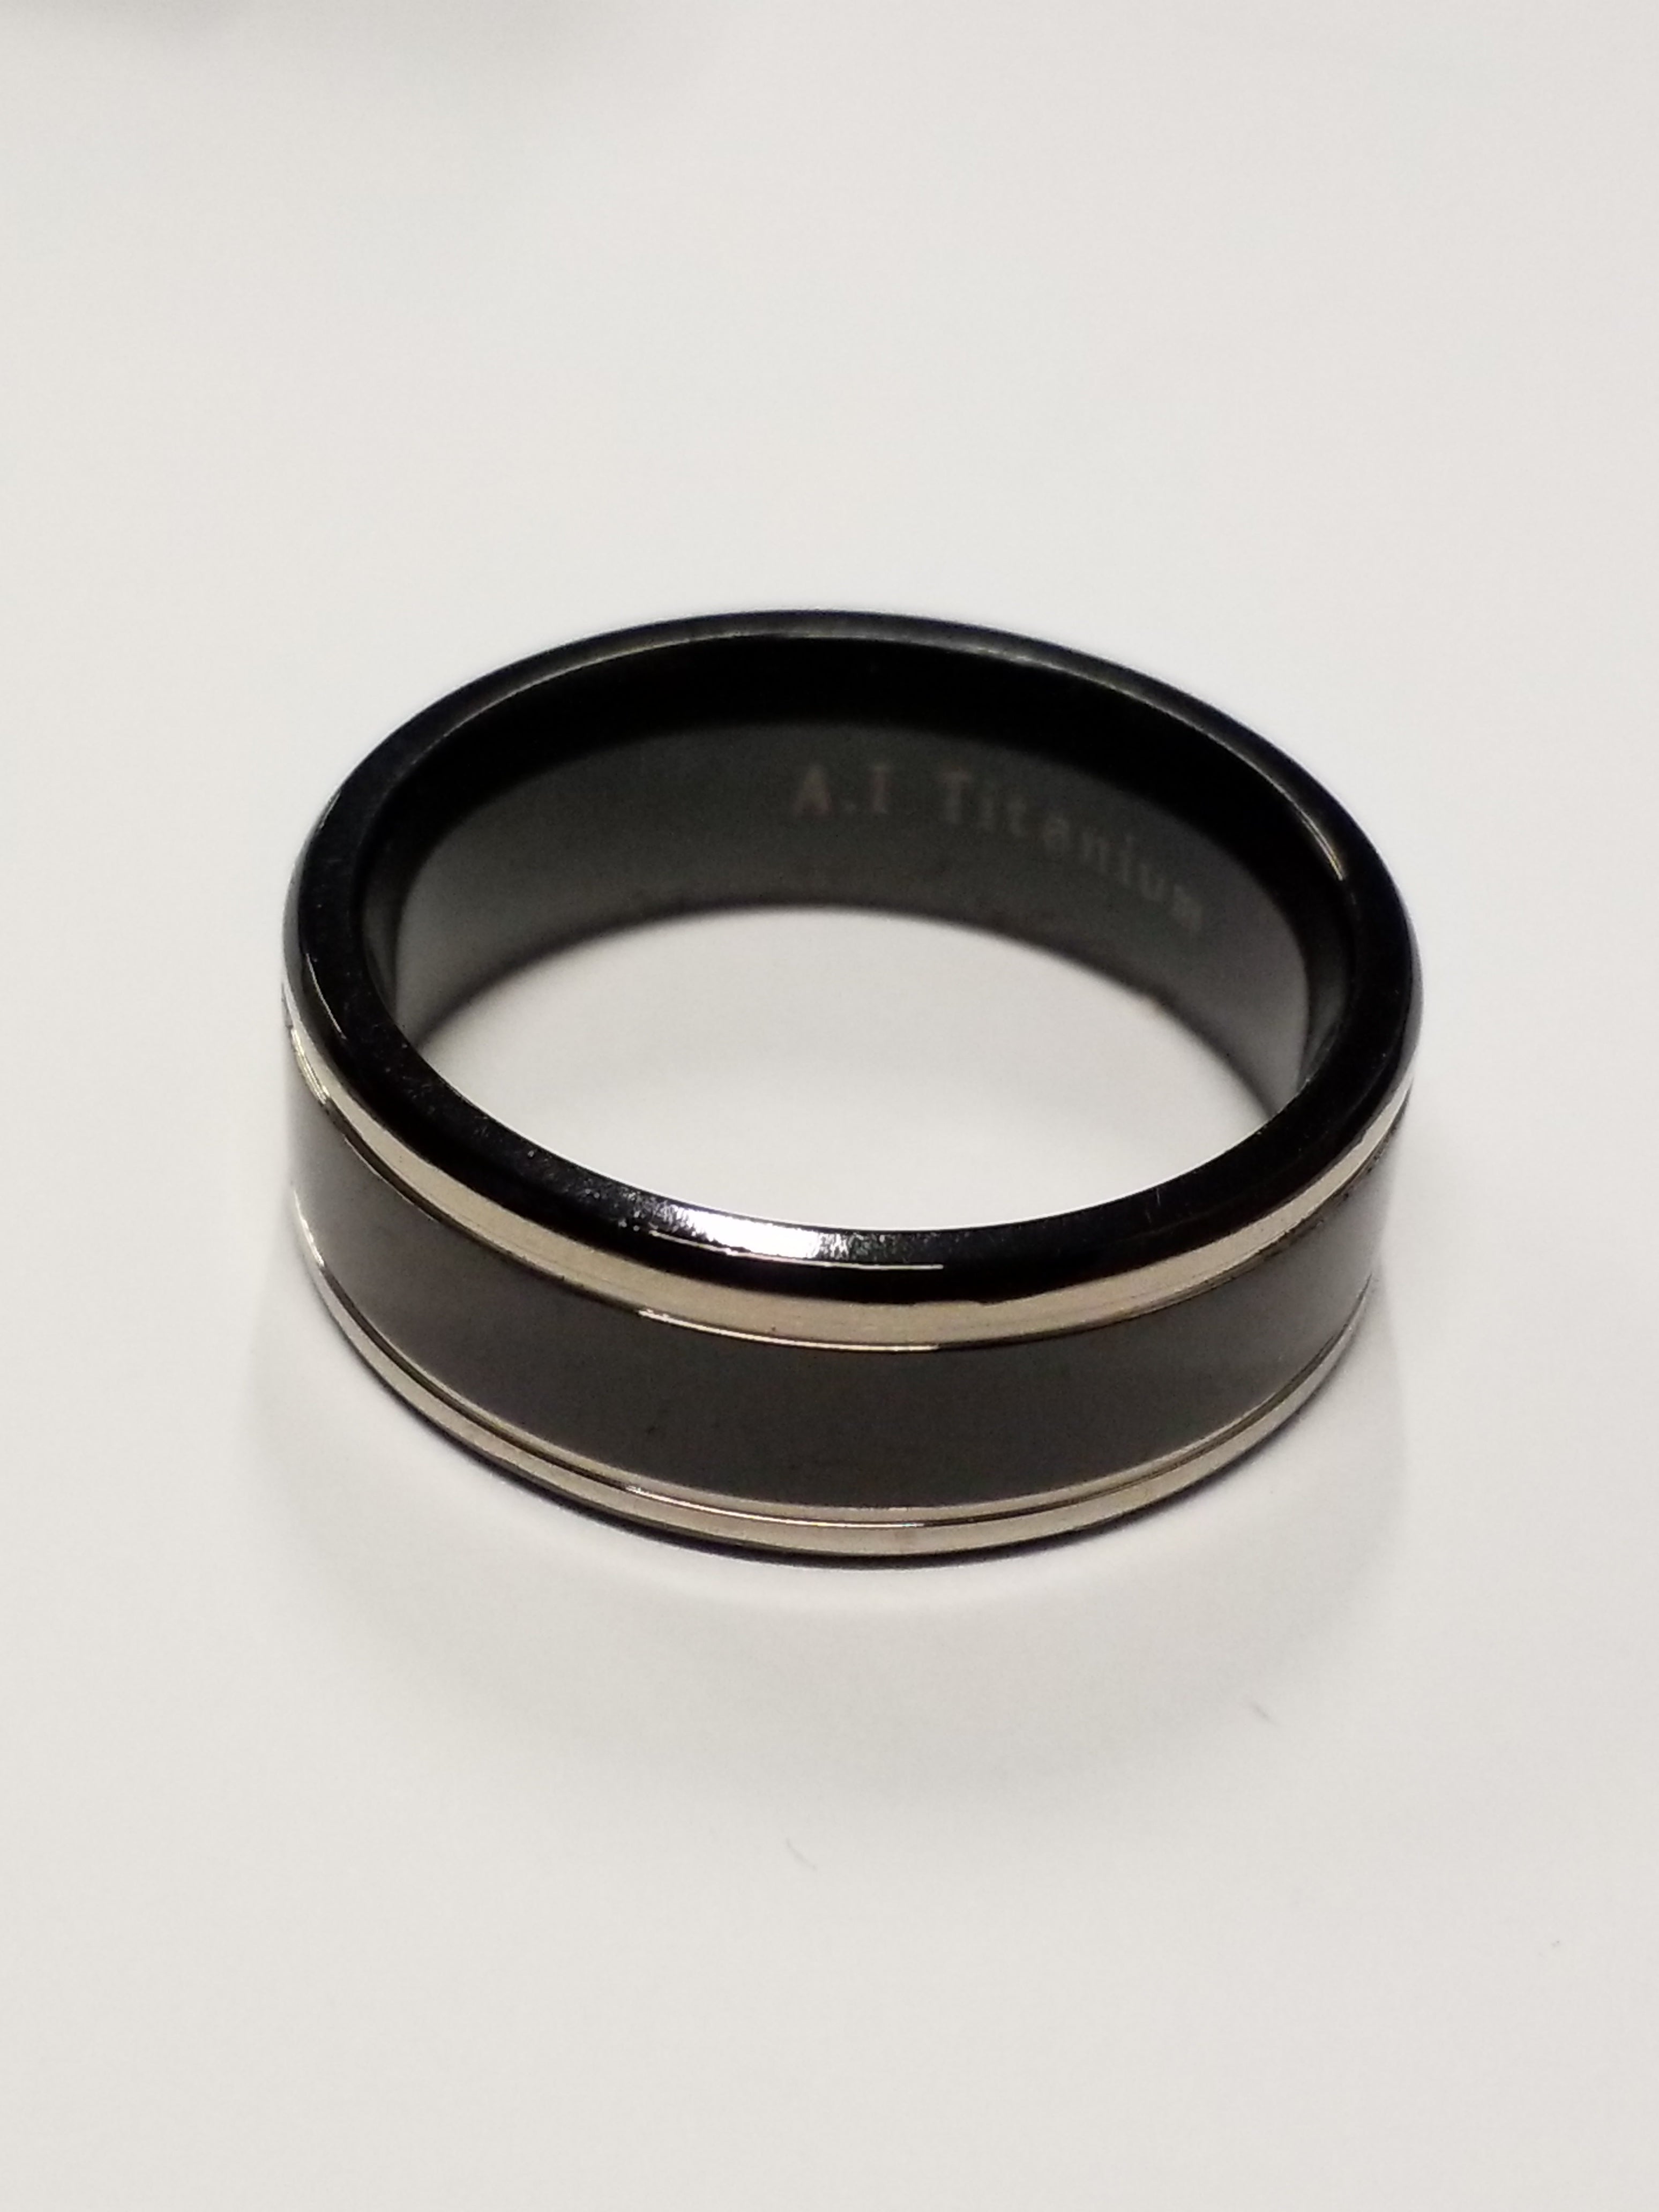 Titanium Band TR51 - Size 10 (Sizes 5 through 14 can be ordered)